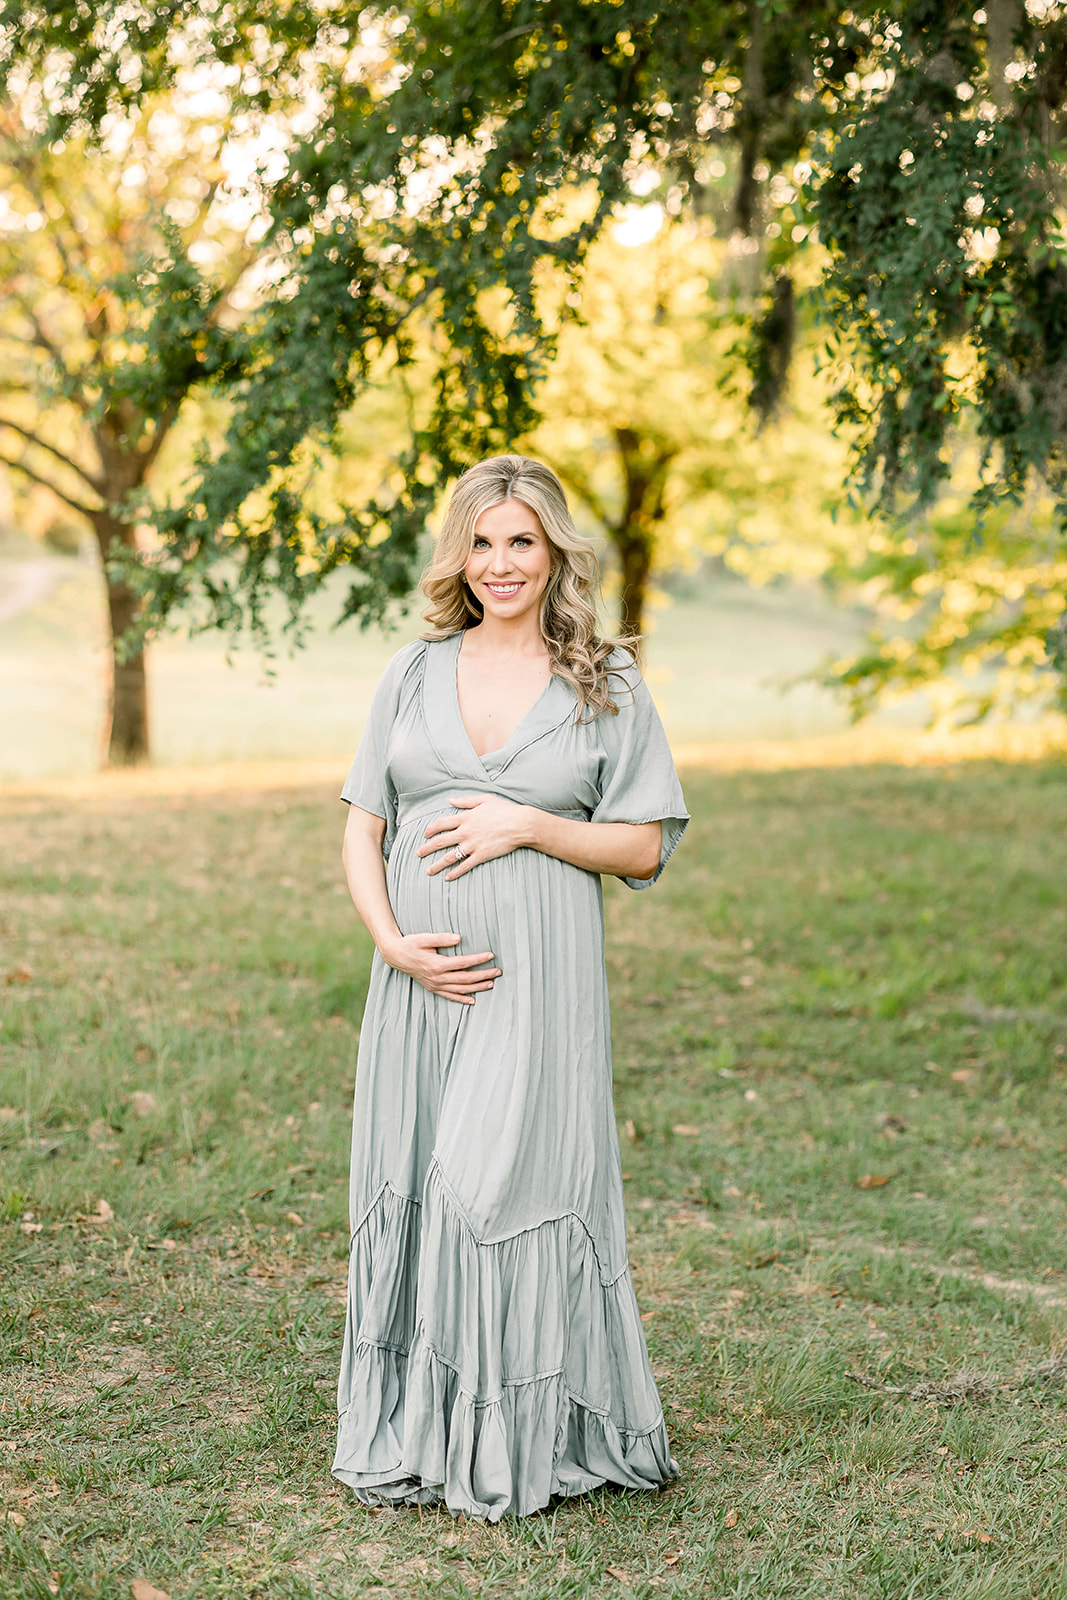 A smiling mom to be in a green flowing maternity gown stands under a tree in a park at sunset